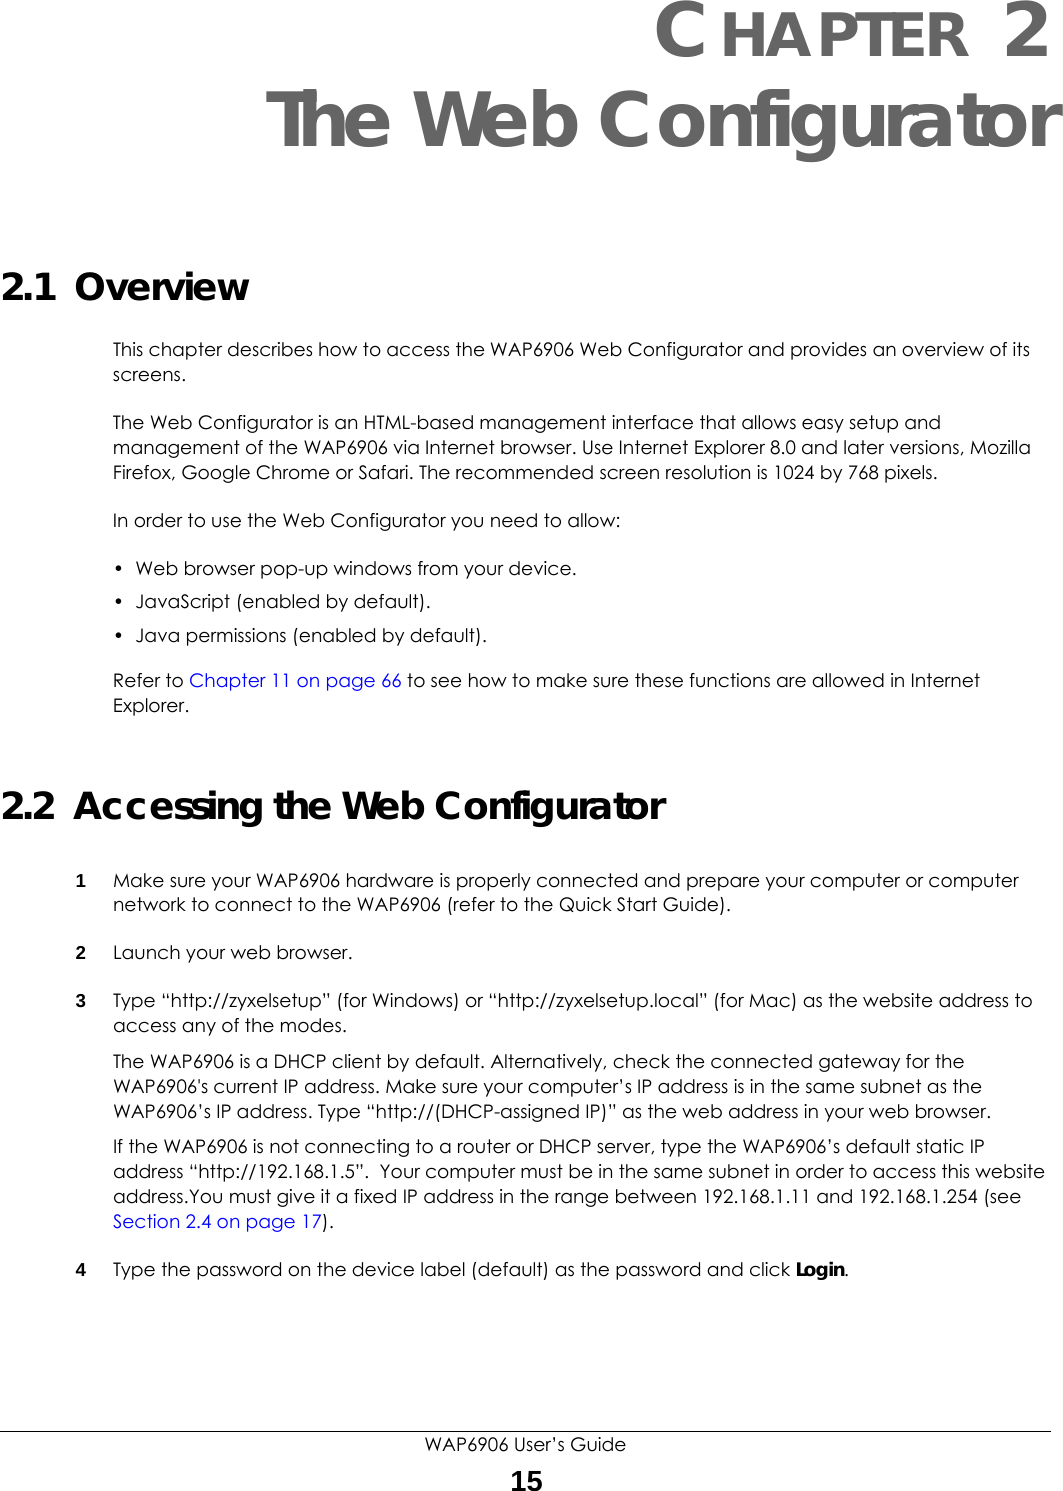 WAP6906 User’s Guide15CHAPTER 2The Web Configurator2.1  OverviewThis chapter describes how to access the WAP6906 Web Configurator and provides an overview of its screens.The Web Configurator is an HTML-based management interface that allows easy setup and management of the WAP6906 via Internet browser. Use Internet Explorer 8.0 and later versions, Mozilla Firefox, Google Chrome or Safari. The recommended screen resolution is 1024 by 768 pixels.In order to use the Web Configurator you need to allow:• Web browser pop-up windows from your device.• JavaScript (enabled by default).• Java permissions (enabled by default).Refer to Chapter 11 on page 66 to see how to make sure these functions are allowed in Internet Explorer.2.2  Accessing the Web Configurator1Make sure your WAP6906 hardware is properly connected and prepare your computer or computer network to connect to the WAP6906 (refer to the Quick Start Guide).2Launch your web browser.3Type “http://zyxelsetup” (for Windows) or “http://zyxelsetup.local” (for Mac) as the website address to access any of the modes.The WAP6906 is a DHCP client by default. Alternatively, check the connected gateway for the WAP6906&apos;s current IP address. Make sure your computer’s IP address is in the same subnet as the WAP6906’s IP address. Type “http://(DHCP-assigned IP)” as the web address in your web browser.If the WAP6906 is not connecting to a router or DHCP server, type the WAP6906’s default static IP address “http://192.168.1.5”.  Your computer must be in the same subnet in order to access this website address.You must give it a fixed IP address in the range between 192.168.1.11 and 192.168.1.254 (see Section 2.4 on page 17).4Type the password on the device label (default) as the password and click Login. 